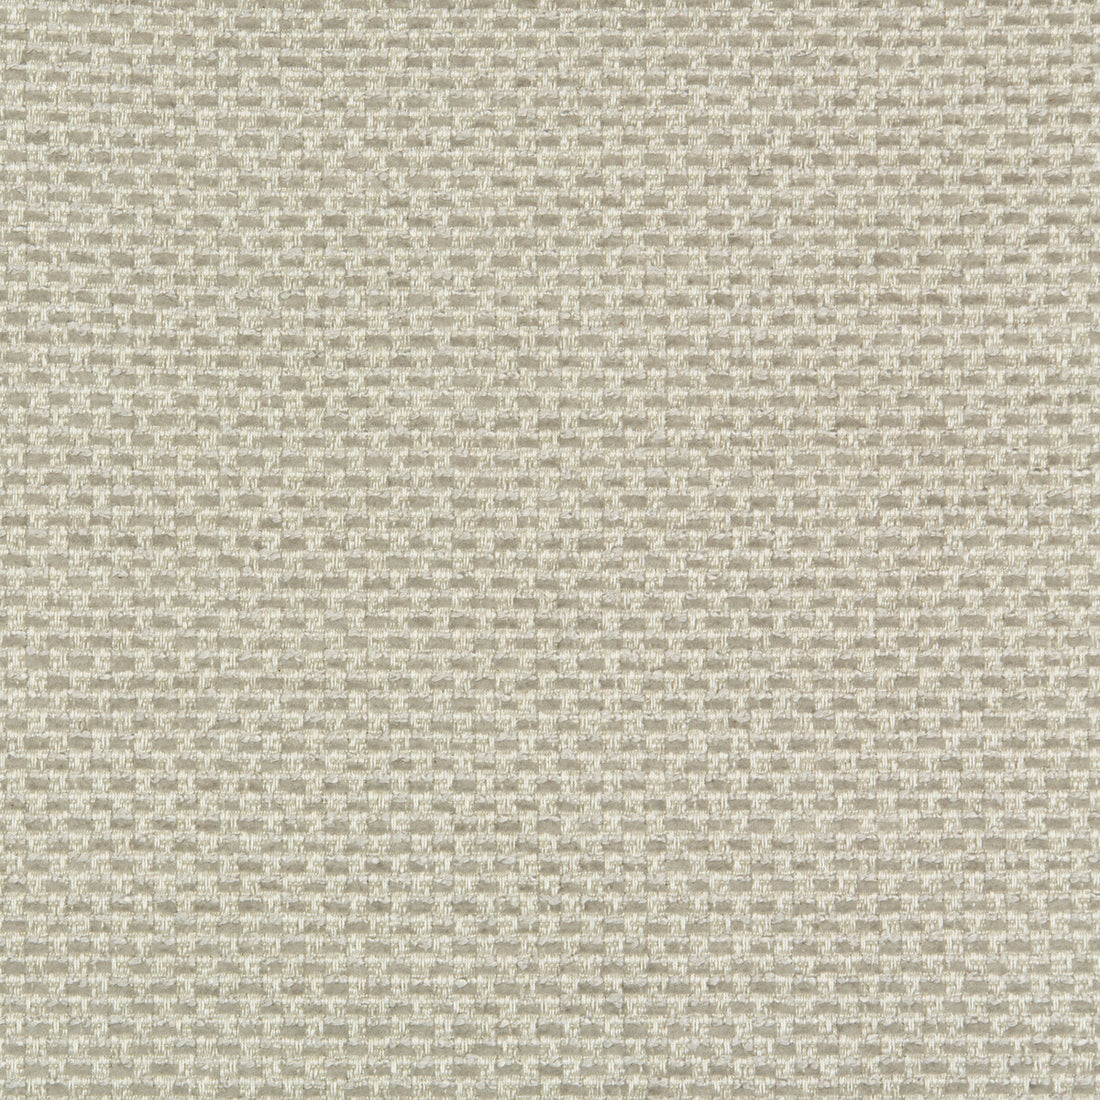 Kravet Design fabric in 34687-11 color - pattern 34687.11.0 - by Kravet Design in the Performance Crypton Home collection